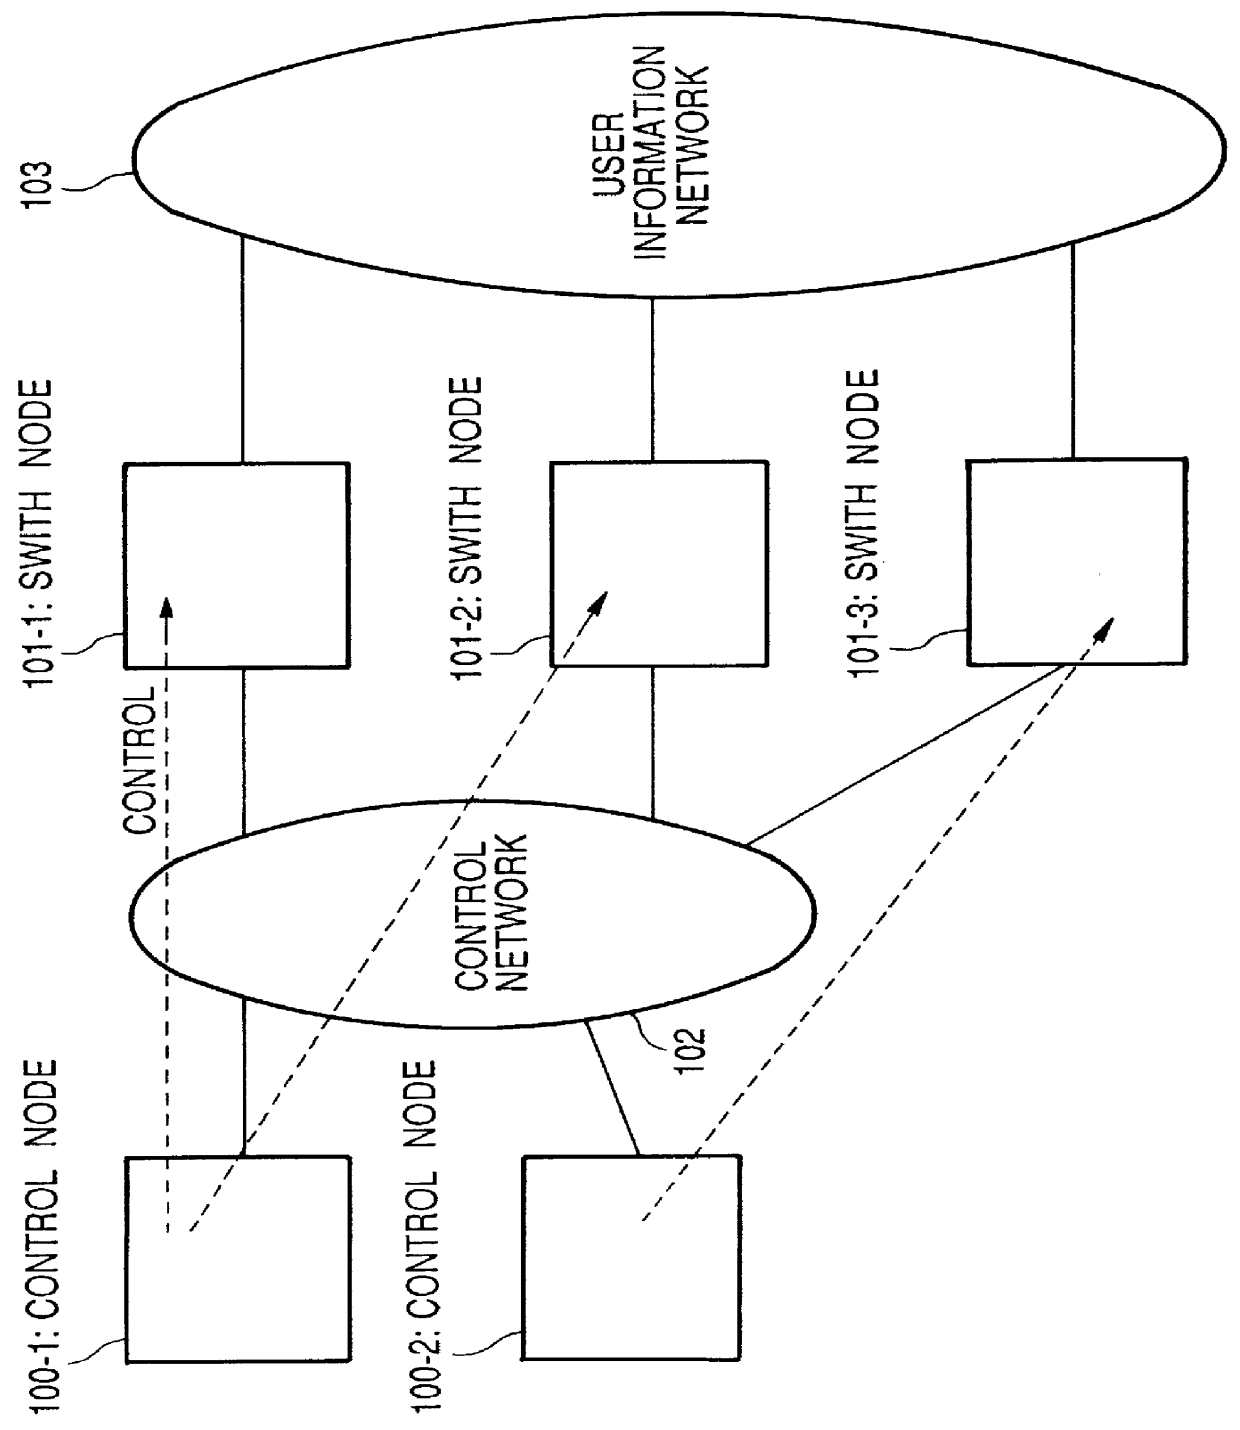 Telecommunication network based on distributed control